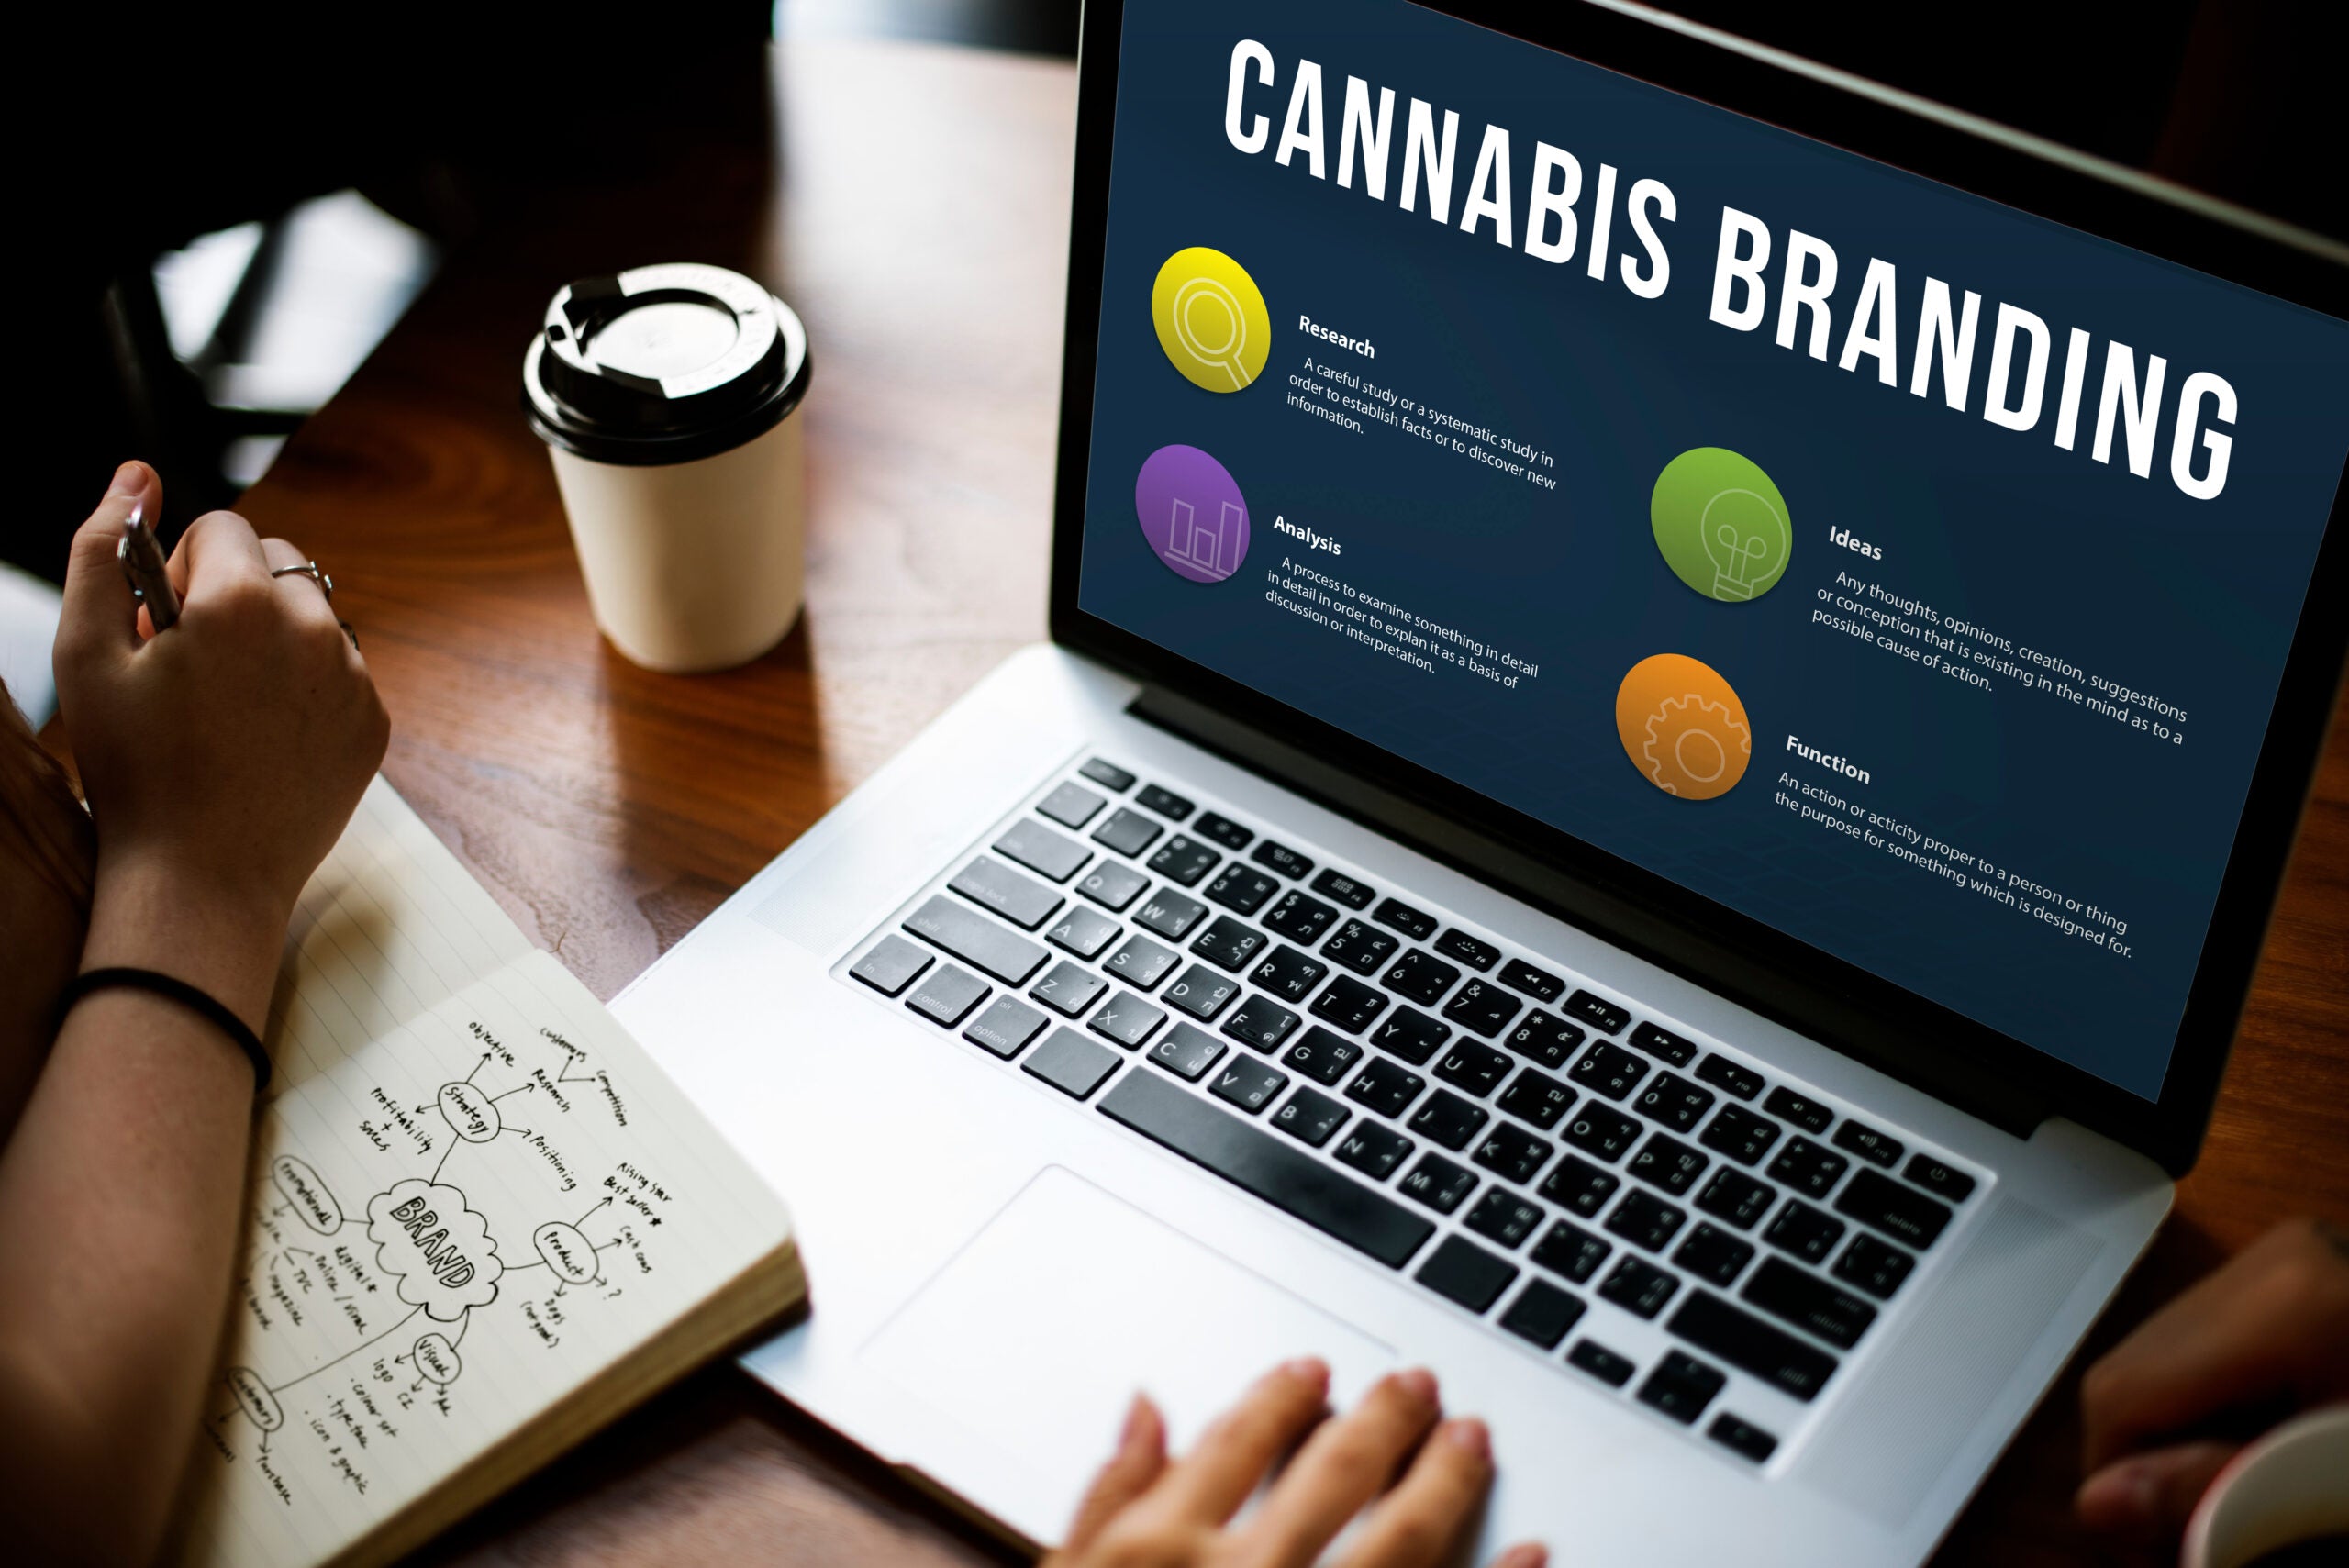 Cannabis Branding: Top Five Trends for Success